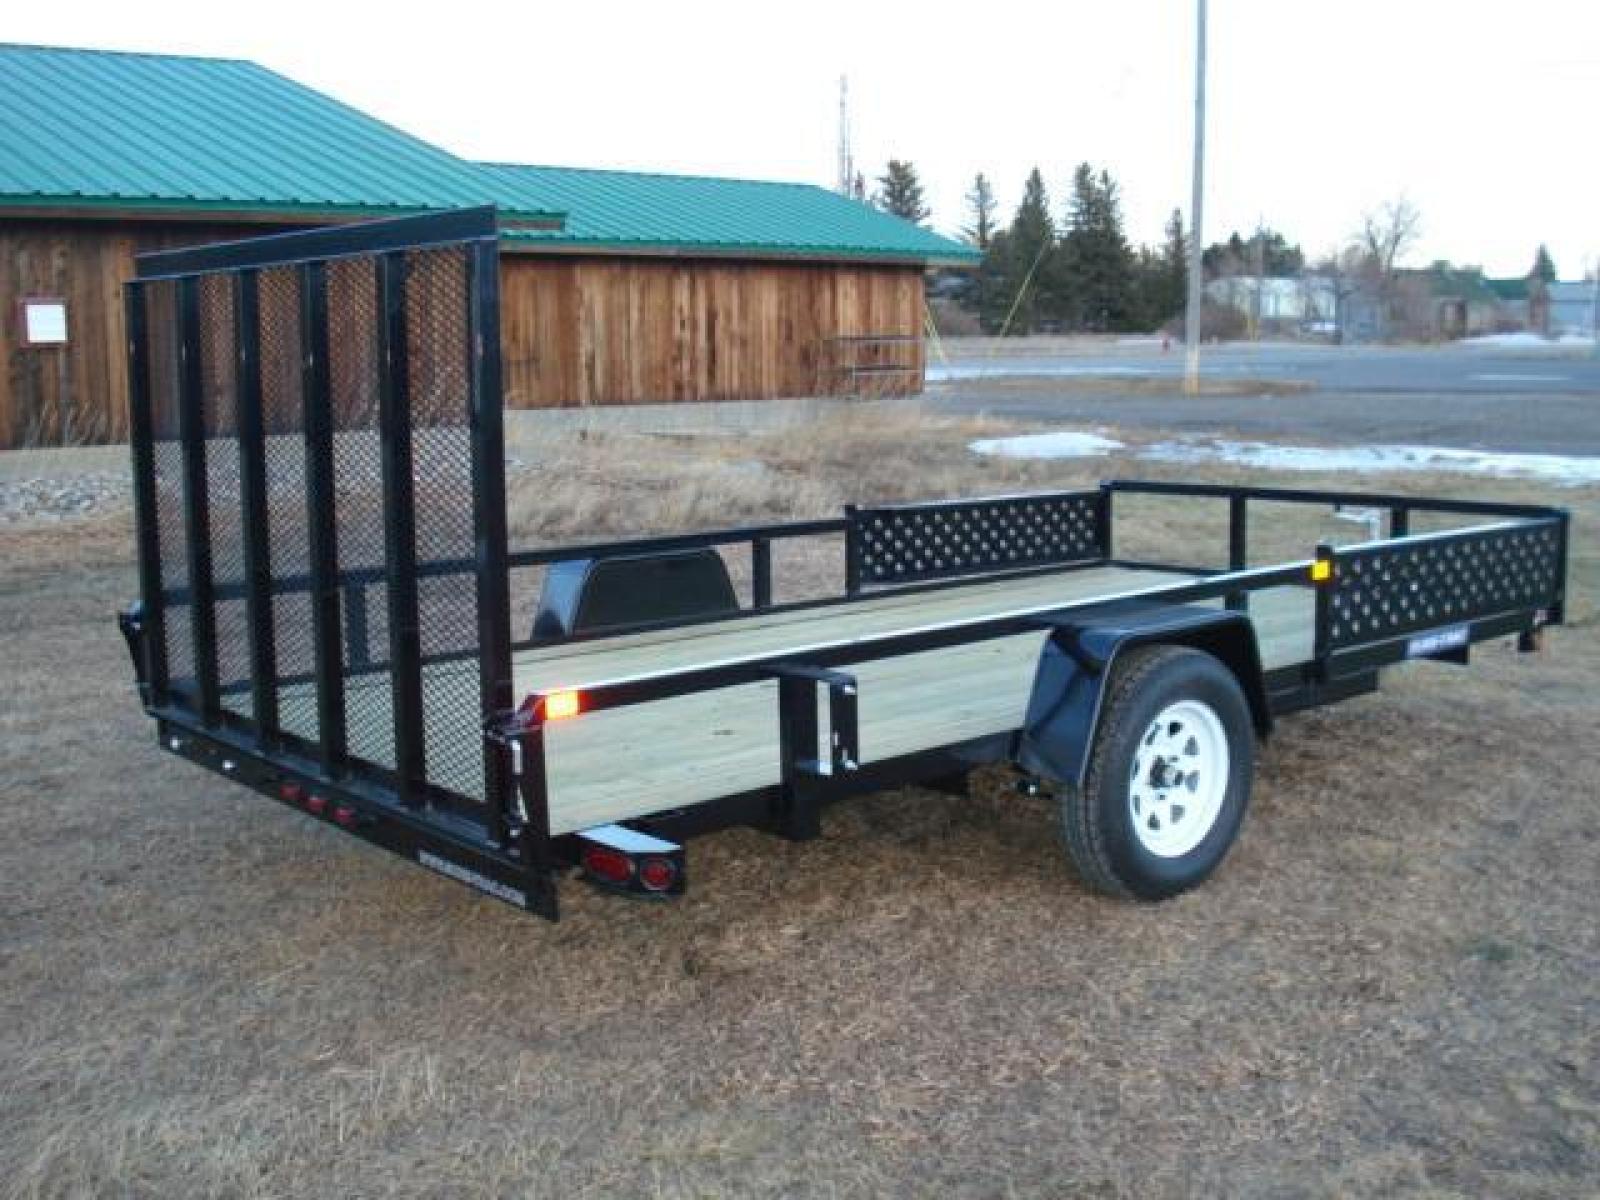 2023 Black SureTrac 7 x 14 ATV , located at 310 West 1st Ave, Big Timber, MT, 59011, (406) 860-8510, 45.833511, -109.957809 - SURE-TRAC 7 X 14 TUBE TOP ATV, 3K GVW, SIDE RAMPS, SPRING ASSISTED REAR RAMP, 15" RADIAL TIRES, TREATED WOOD DECK, LED LIGHTS, WIRING RUN IN CONDUIT, POWDER COAT FINISH, SPARE TIRE MOUNT. SURE-TRAC QUALITY FIT AND FINISH. OPTIONAL SPARE TIRE - $165.00. THE BEST TRAILERS AT THE BEST PRICE!!! Traile - Photo #2